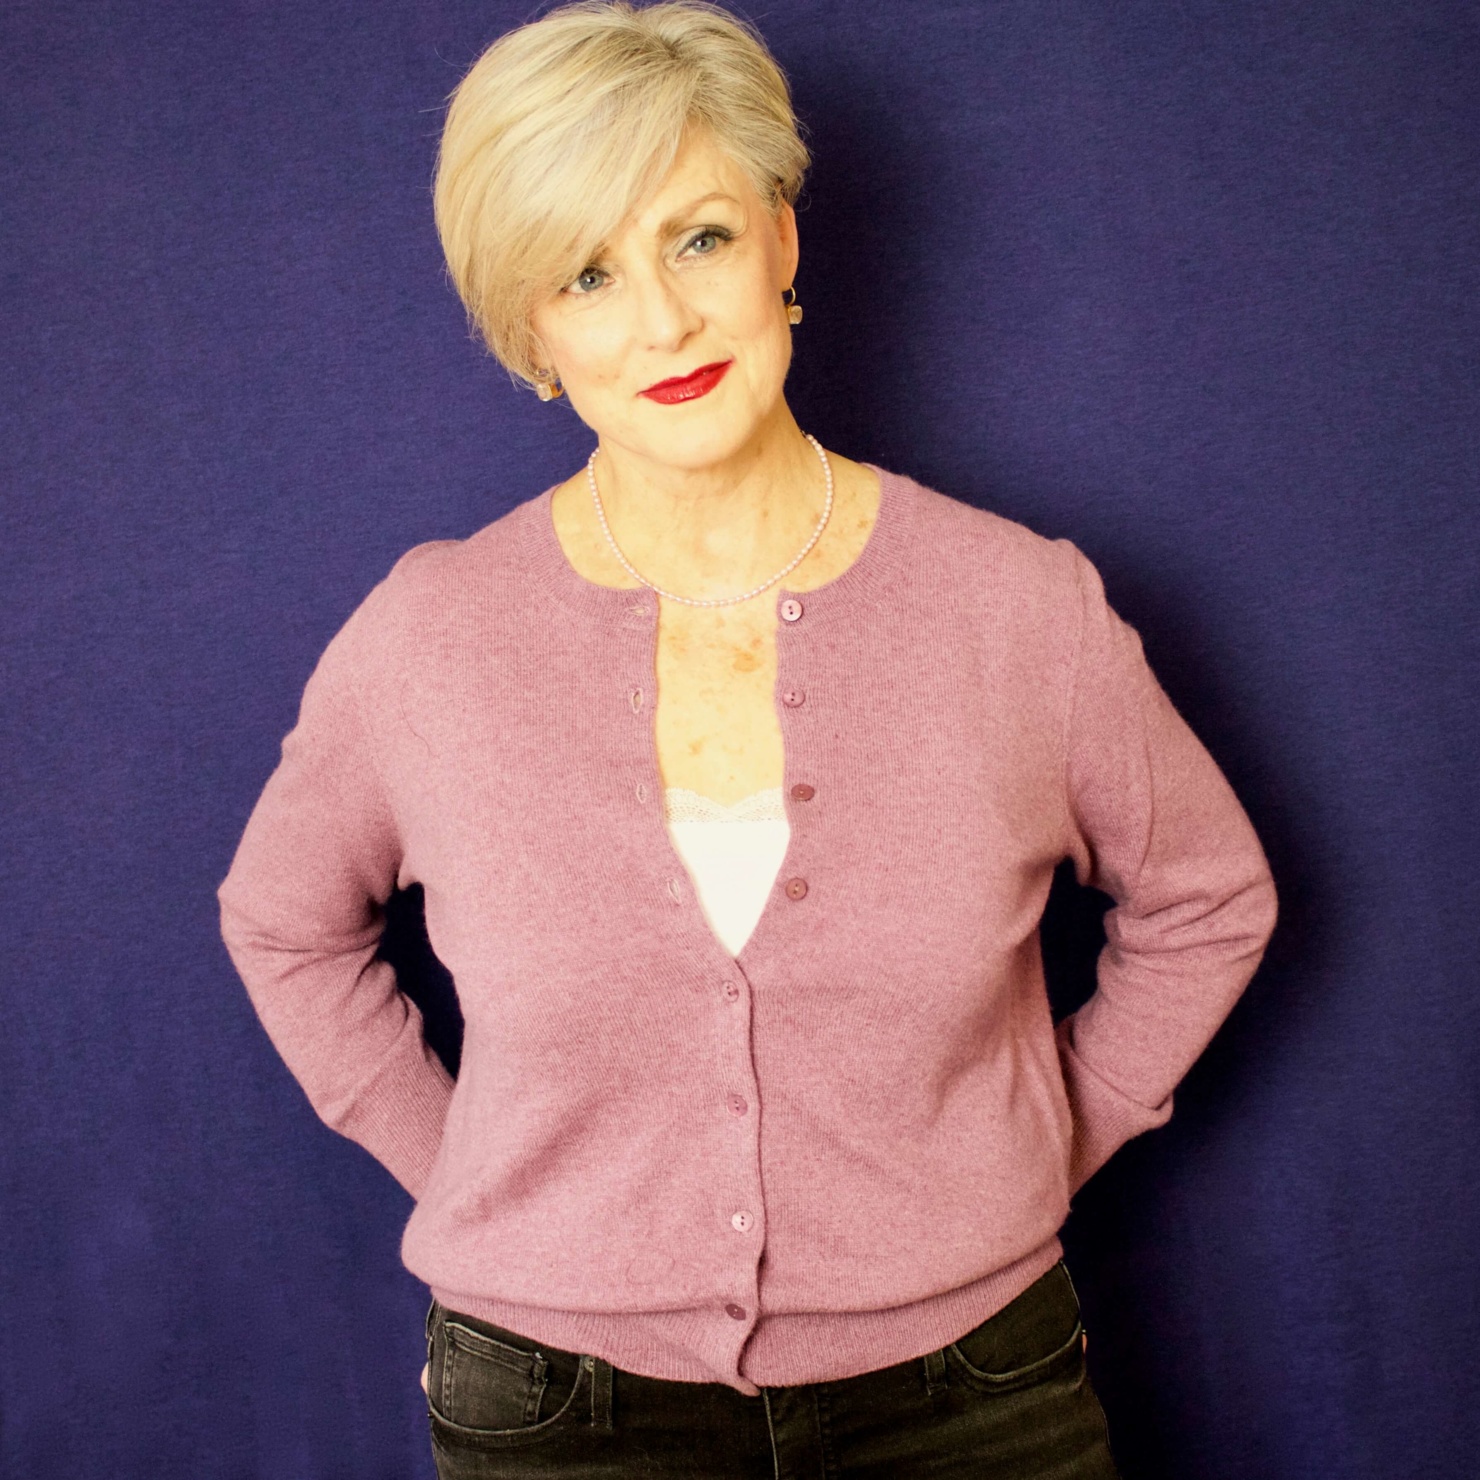 beth from Style at a Certain Age wears a cashmere cardigan from Marks & Spencer